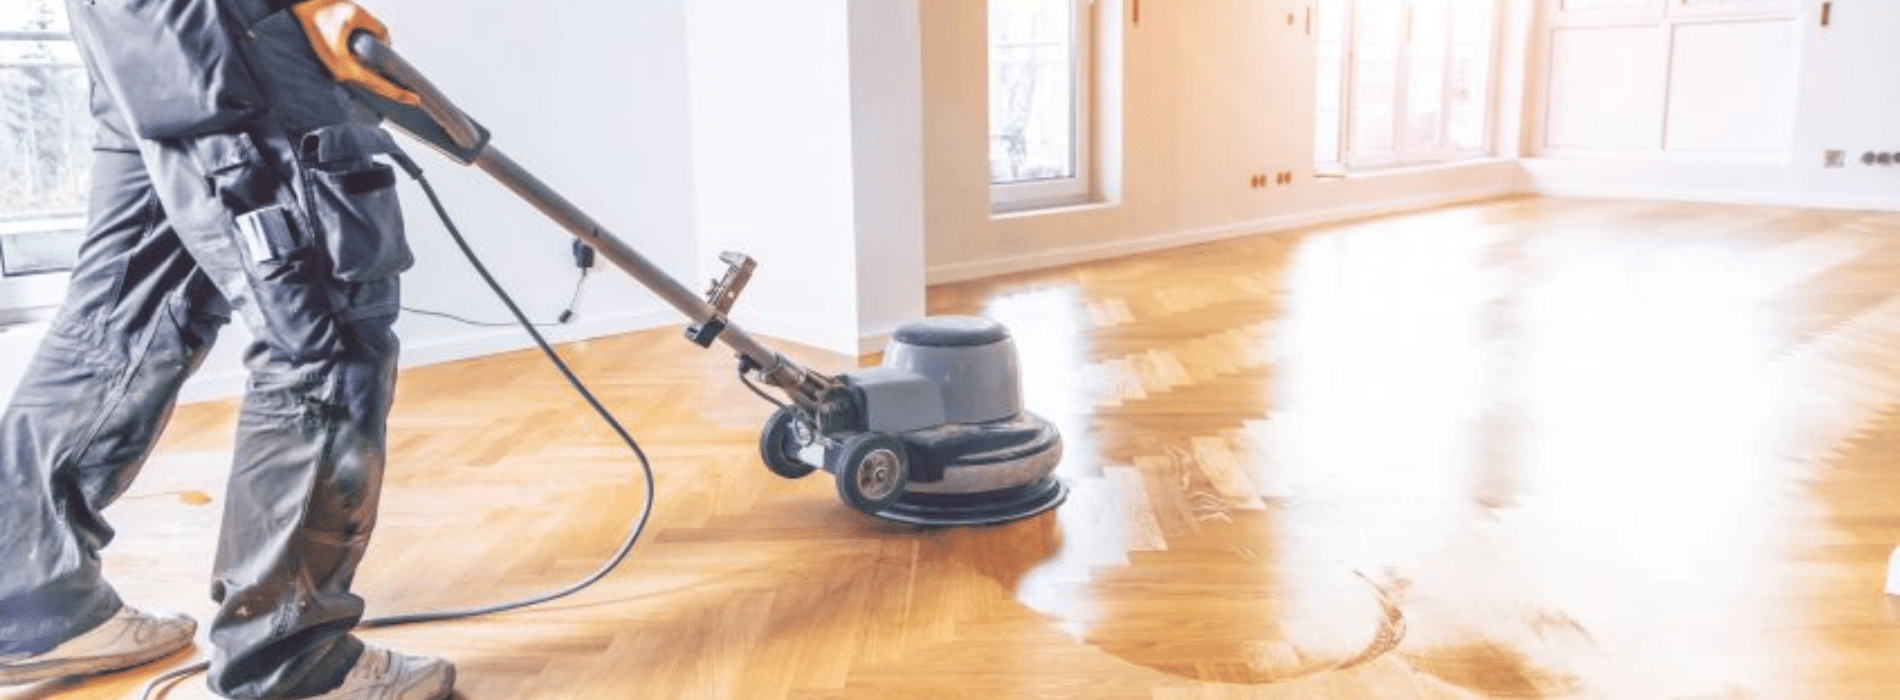 Mr Sander® efficiently sand a herringbone floor using a Bona FlexiSand 1.9, a powerful buffer sander in Clayhall, IG5. With its dimensions of Ø 407mm and an effect of 1.9kW, this sander, connected to a dust extraction system with a HEPA filter, ensures a clean and professional finish.

